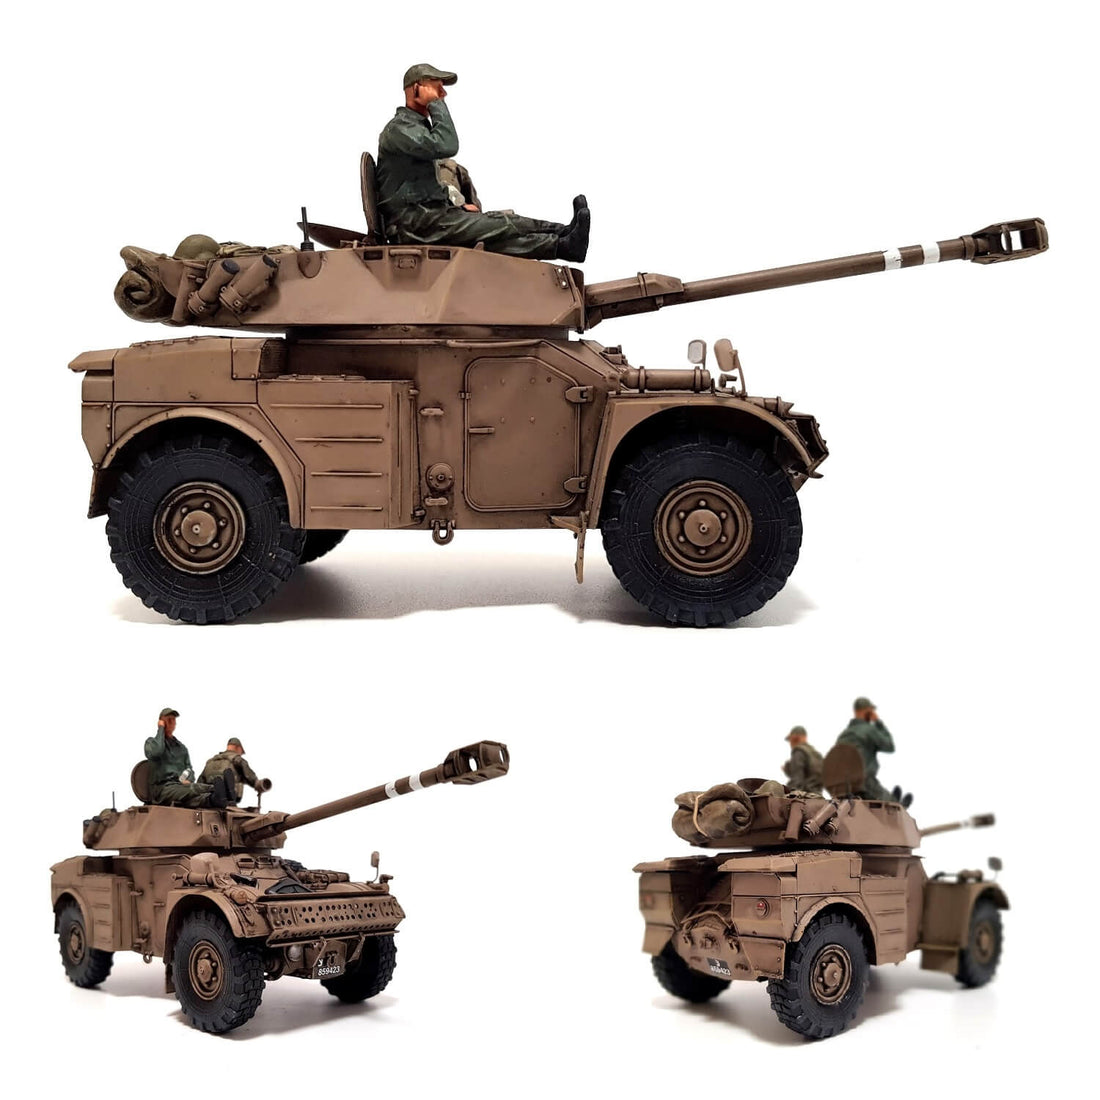 1:35 French AML-90 Light Armoured Car from TAKOM